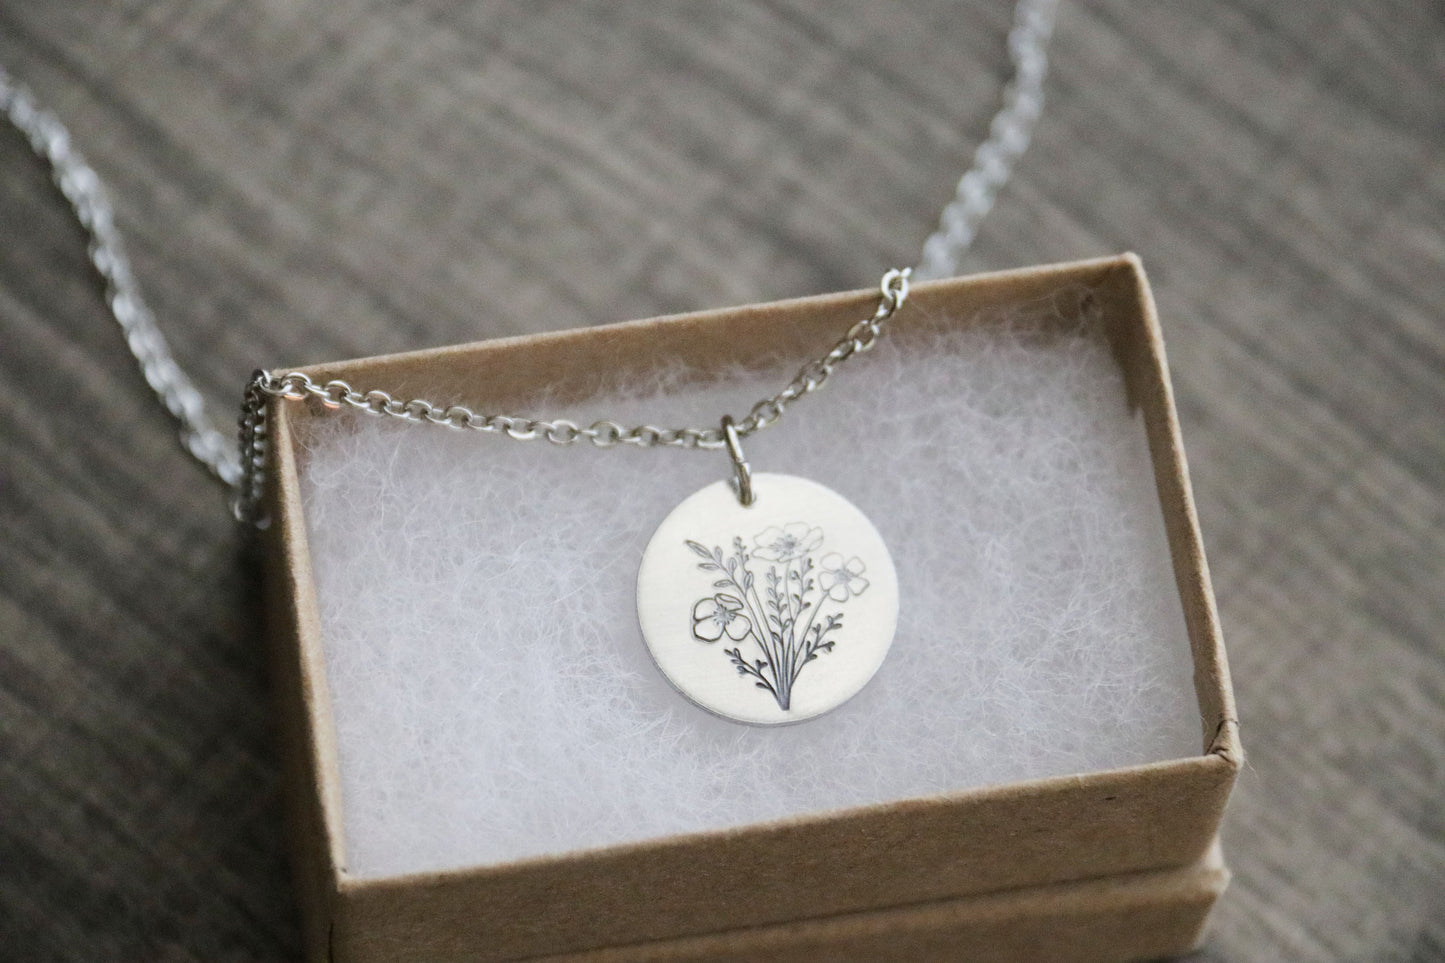 Poppy Necklace Hand Stamped, Personalized Optional